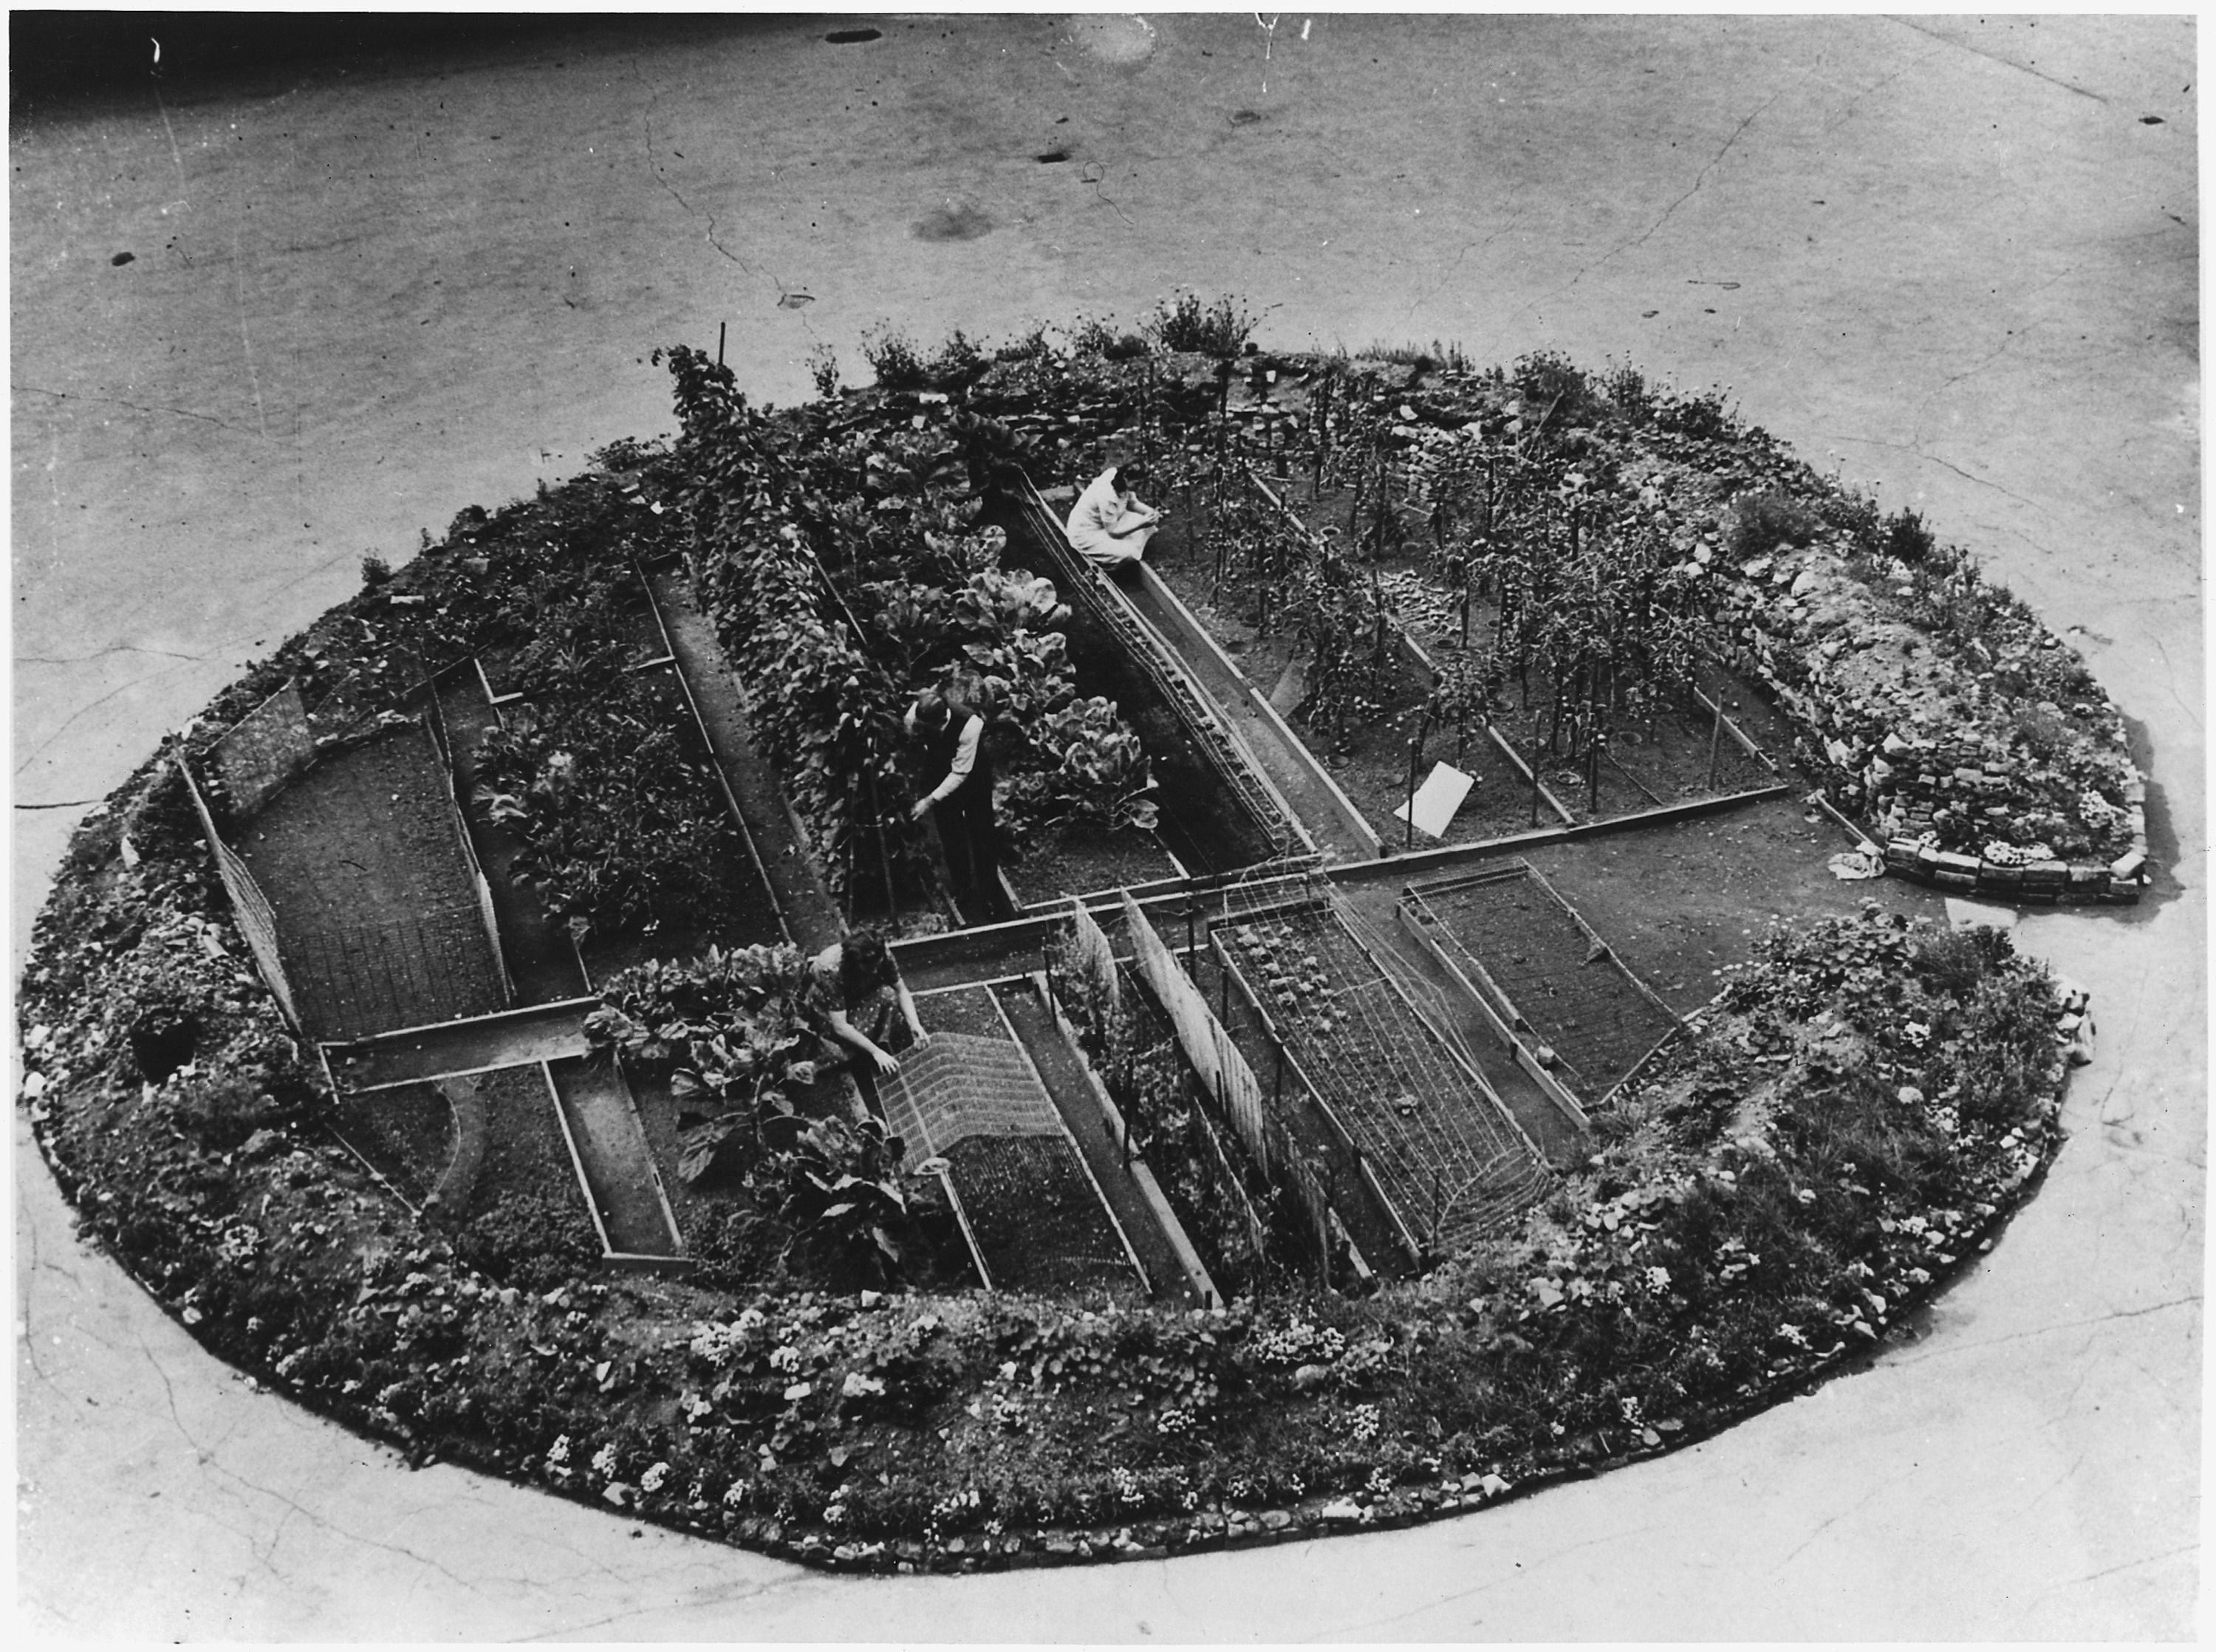 lossy-page1-3000px-victory gardens where the nazi-s sowed death- a londoner and his wife have sown life-giving vegetables i